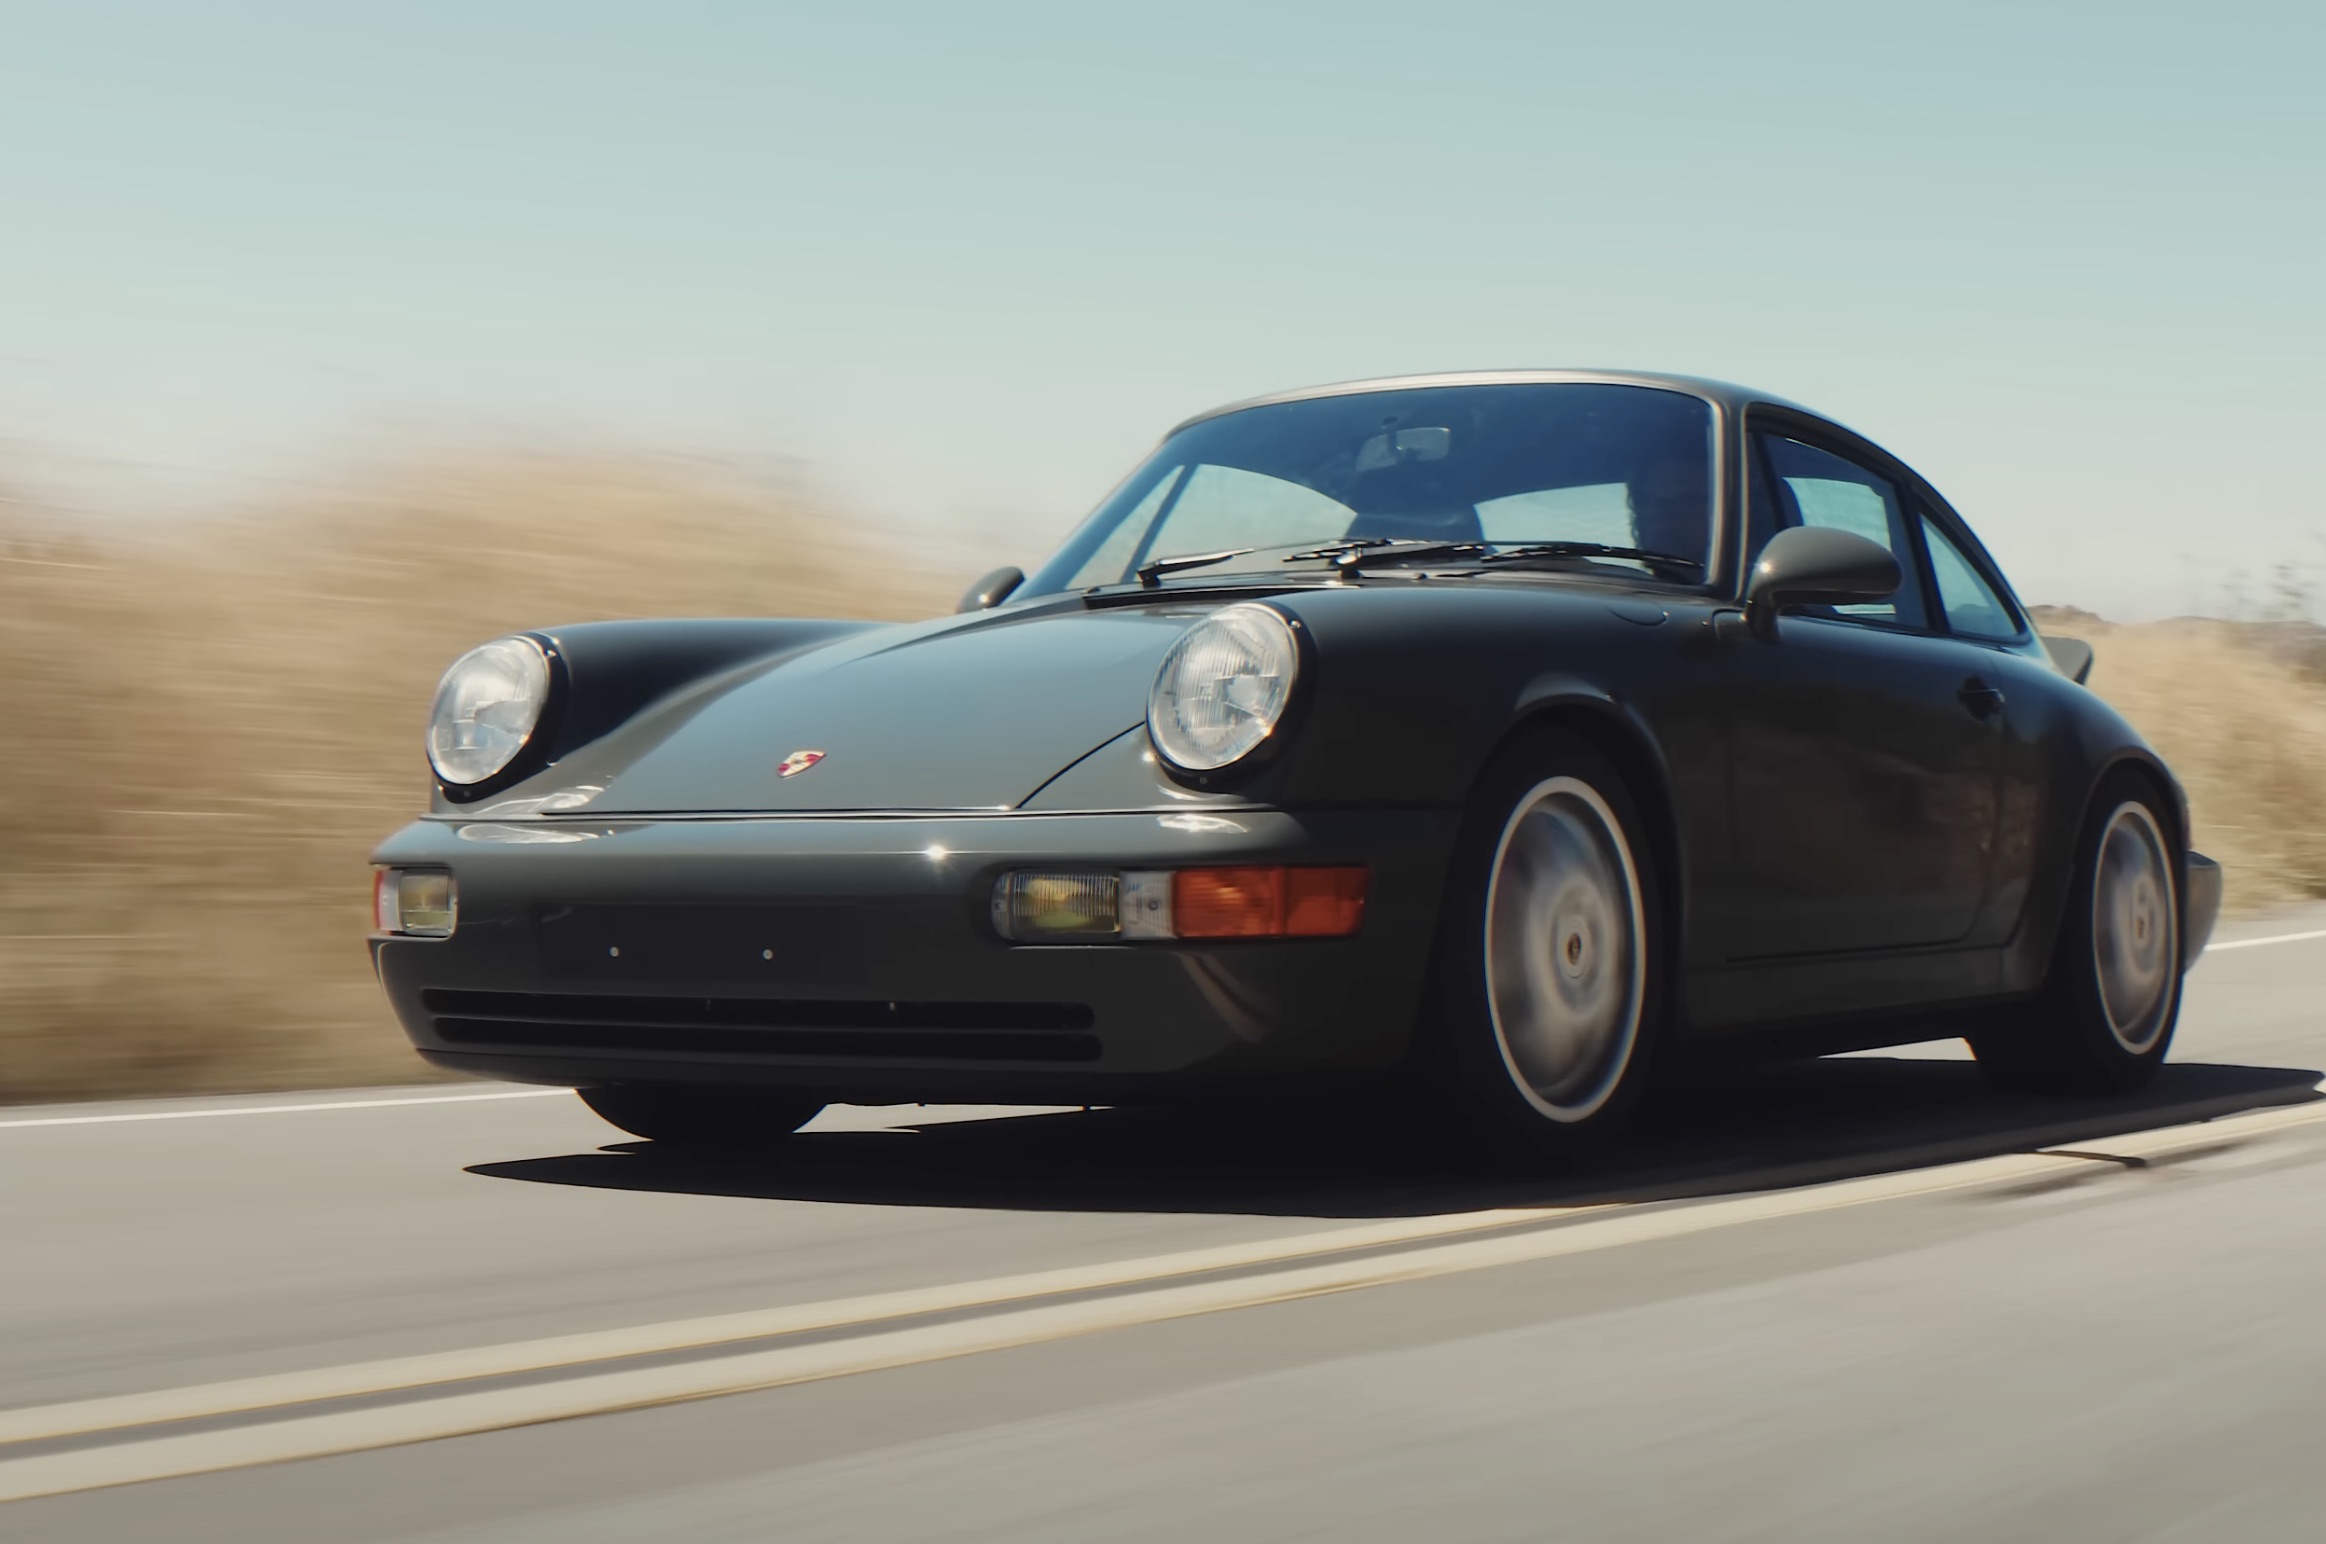 Is this the world’s best restomod 911? Henry Catchpole aims to find out